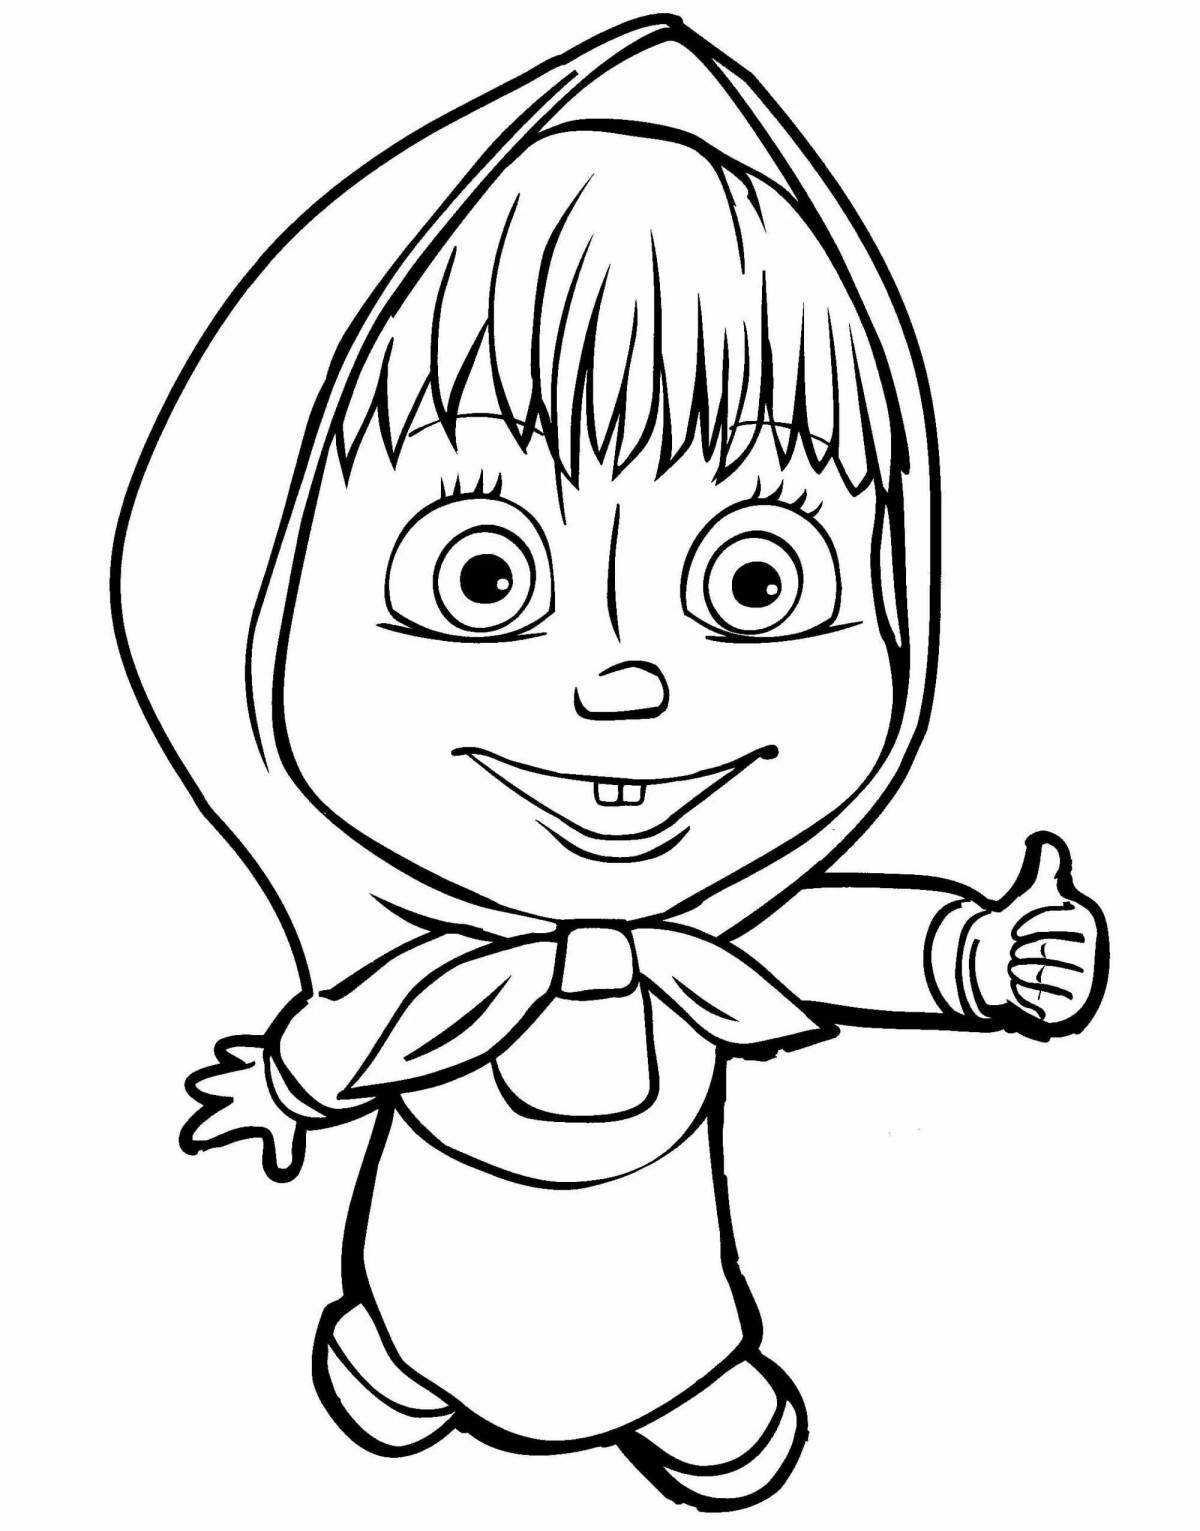 Colored cartoon children's coloring pages